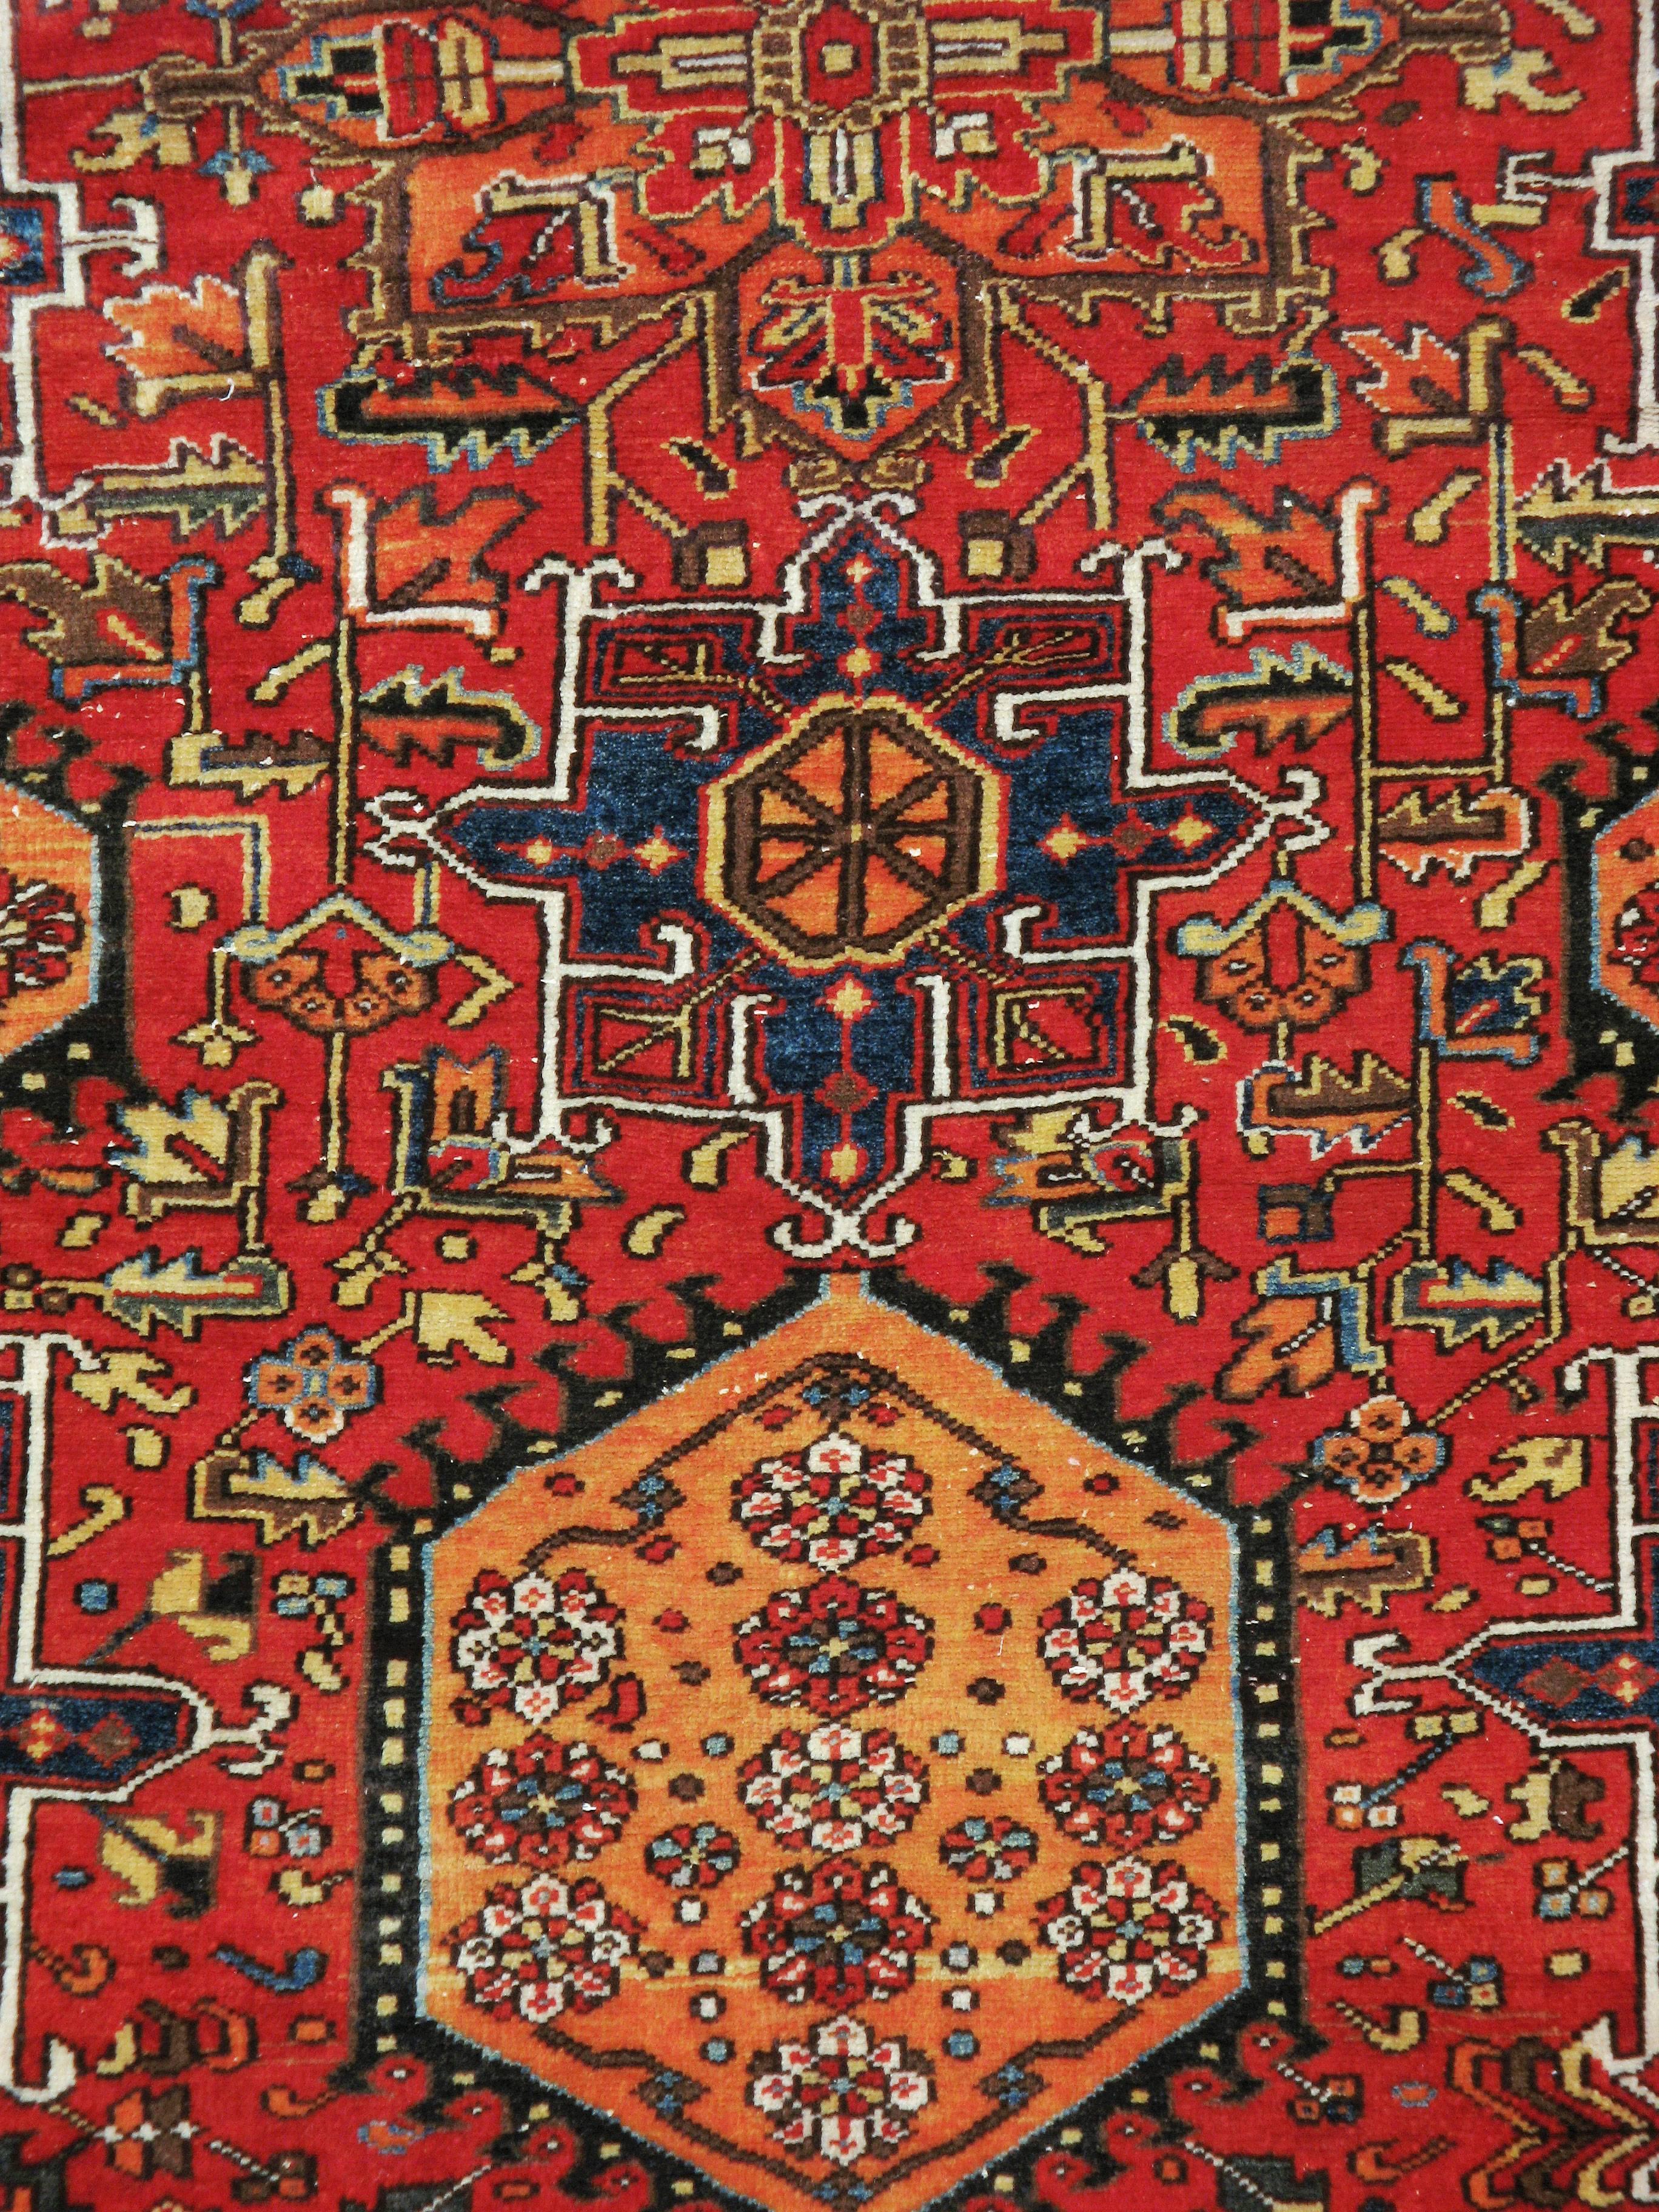 A vintage Persian Karajeh rug from the mid-20th century.

Measures: 8' 5